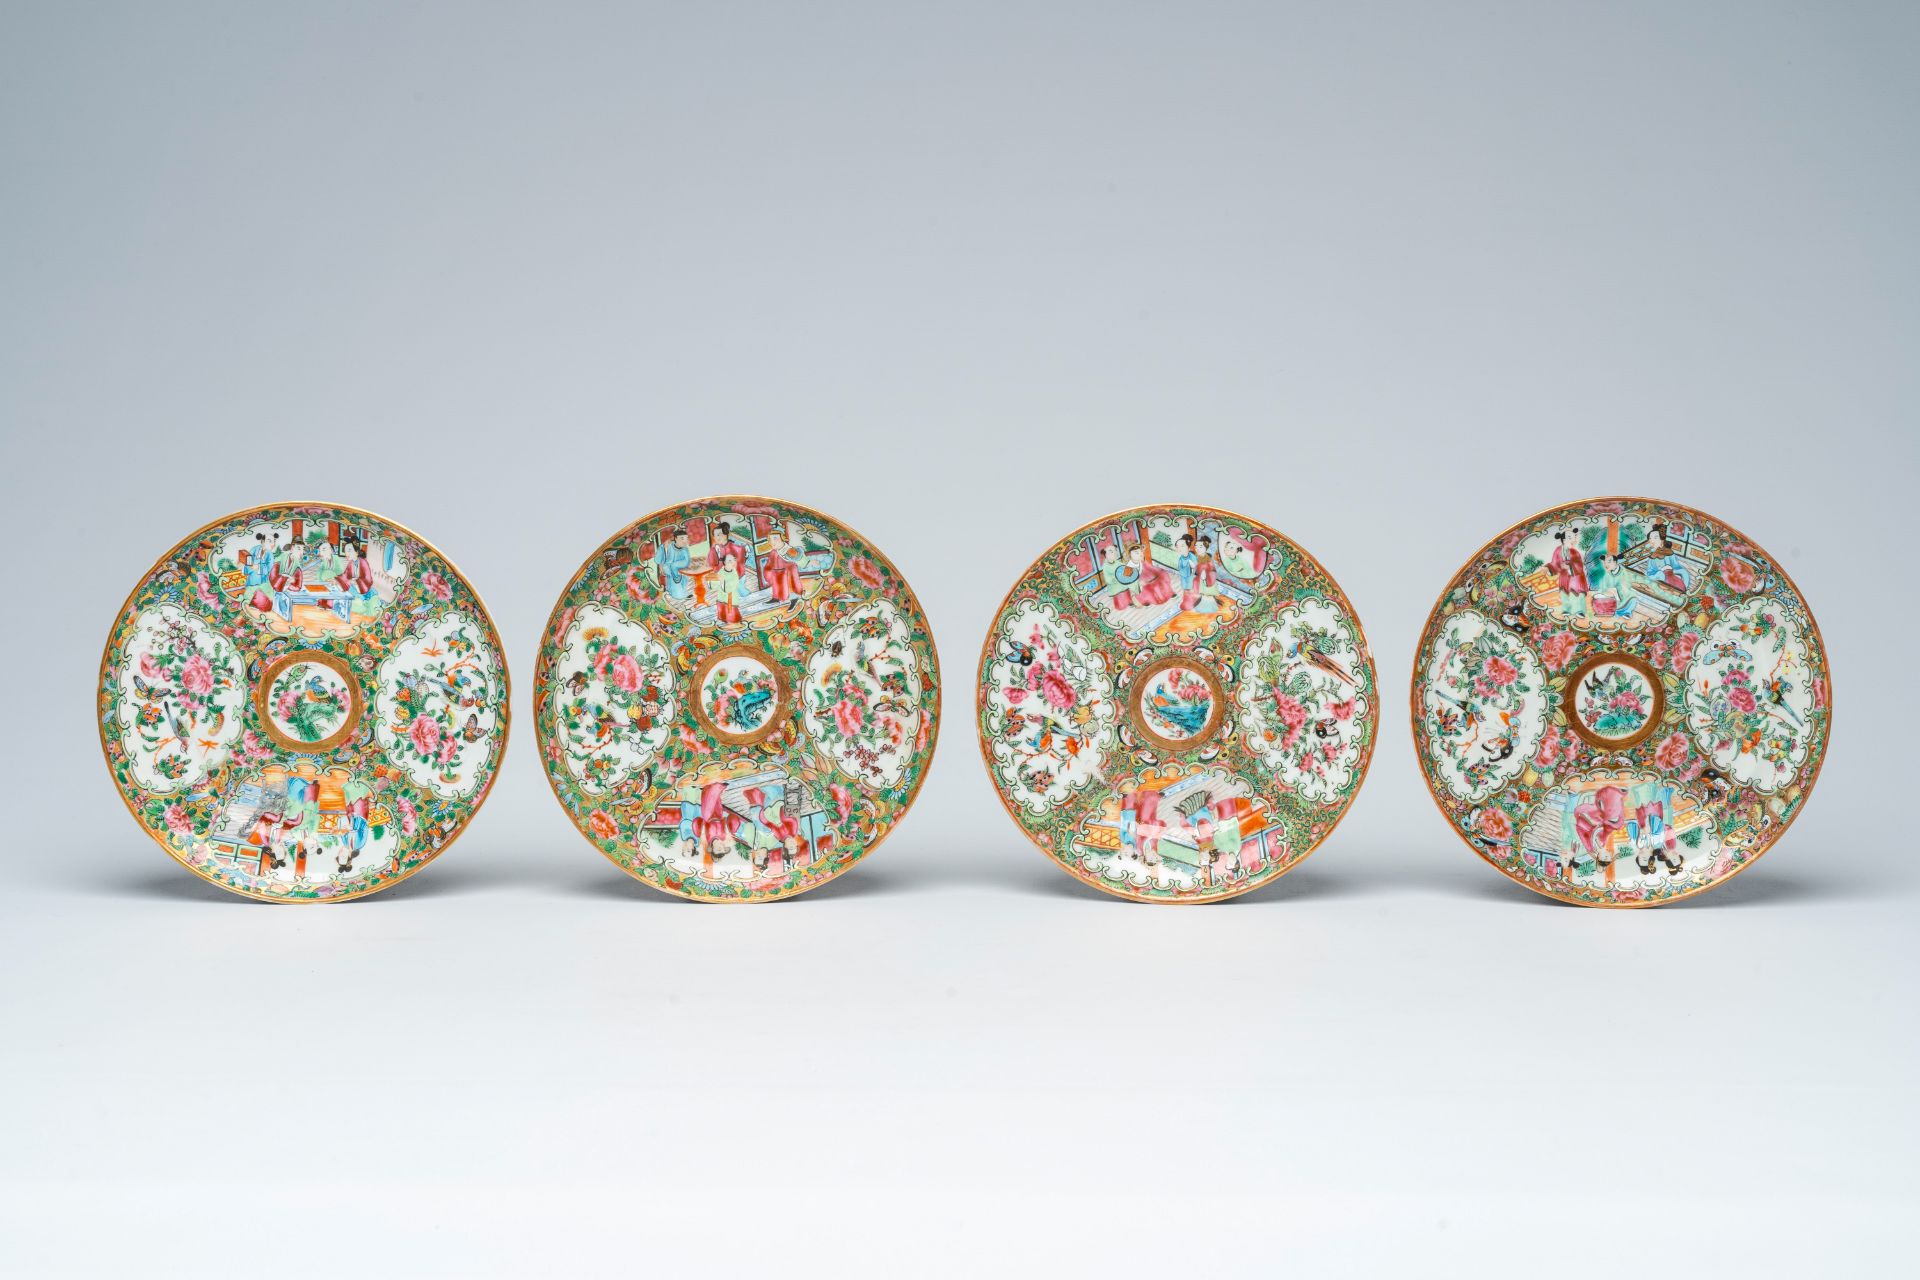 Eleven Chinese Canton famille rose plates with palace scenes and floral design, 19th C. - Image 2 of 7